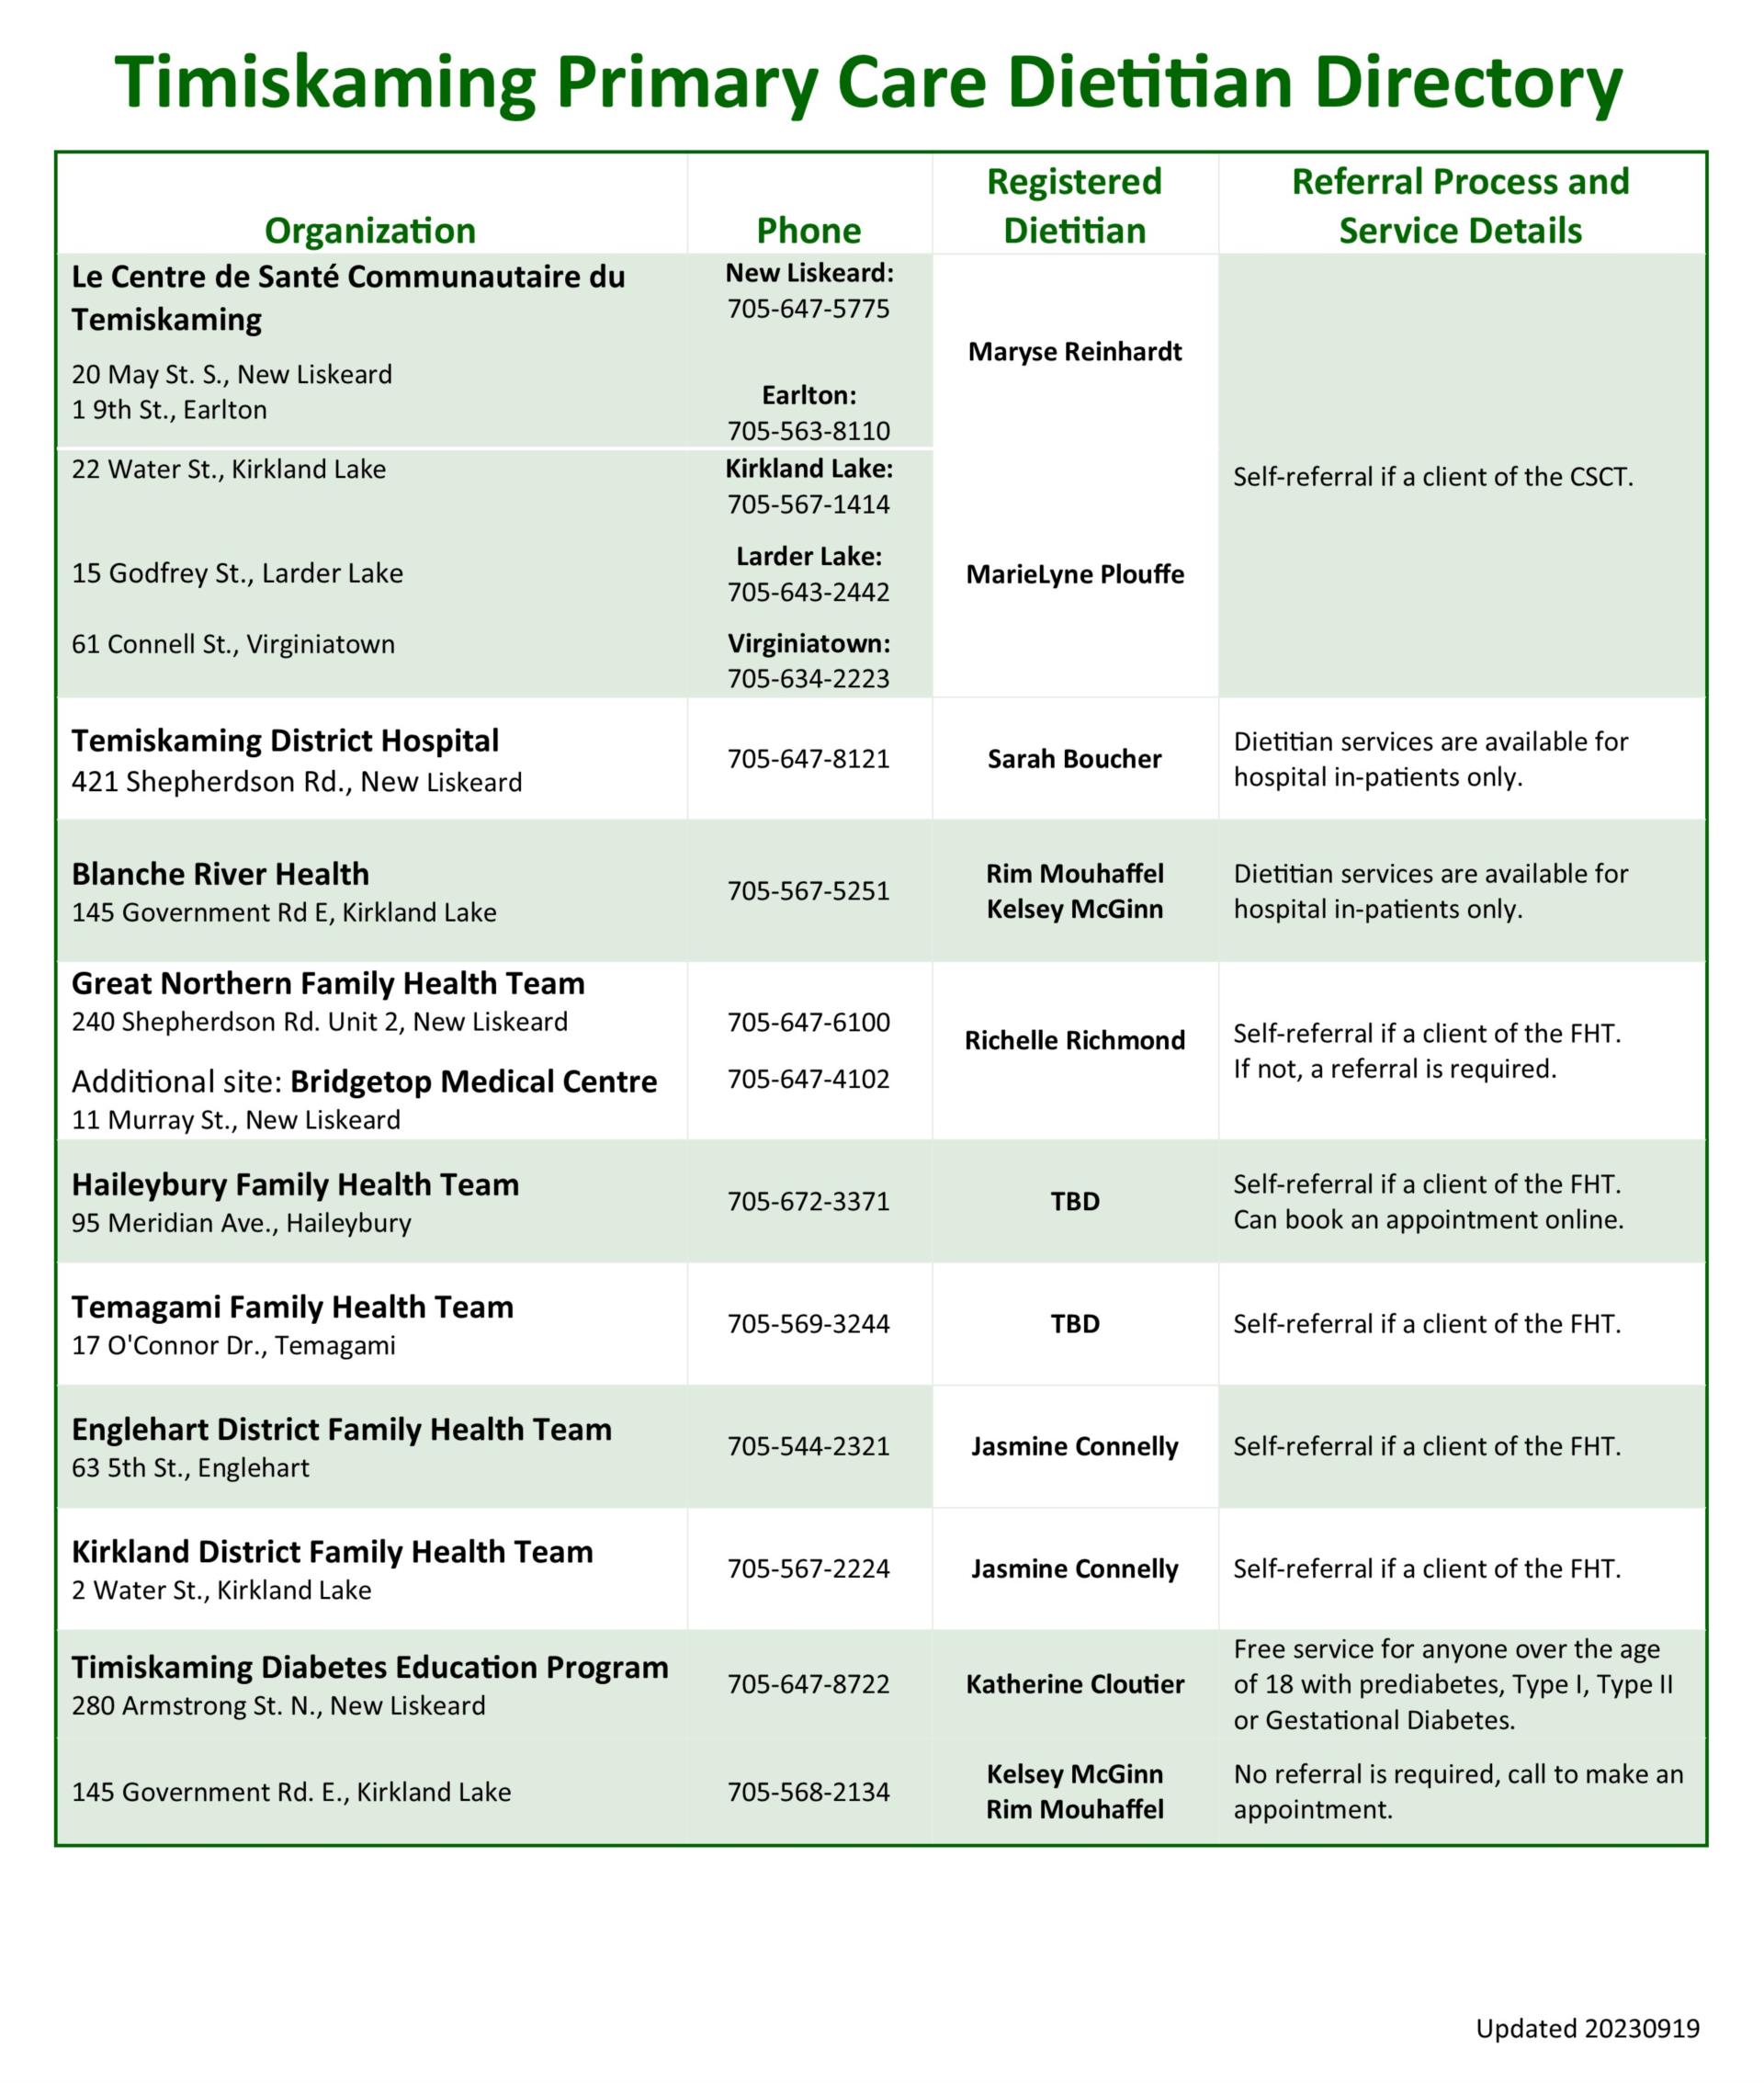 Timiskaming Primary Care Dietitian Directory